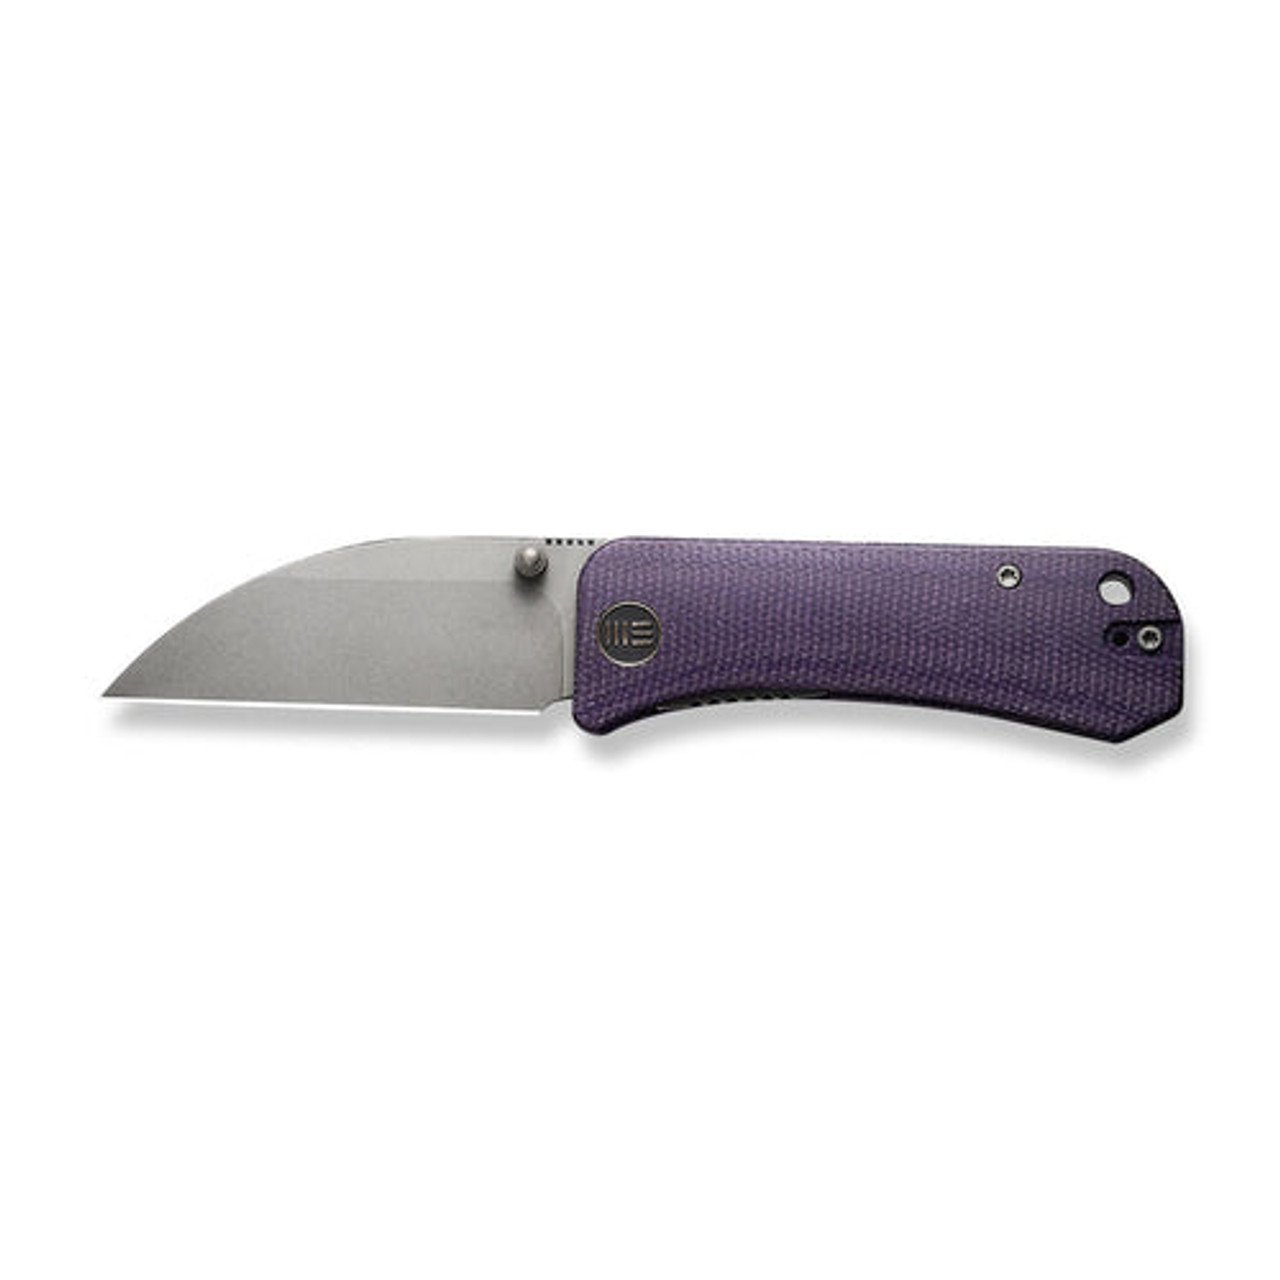 WE Knife Banter Wharncliffe (WE19068J-2) 2.85" CPM S35VN Gray Stonewashed Wharncliffe Plain Blade, Purple Canvas Micarta Handle